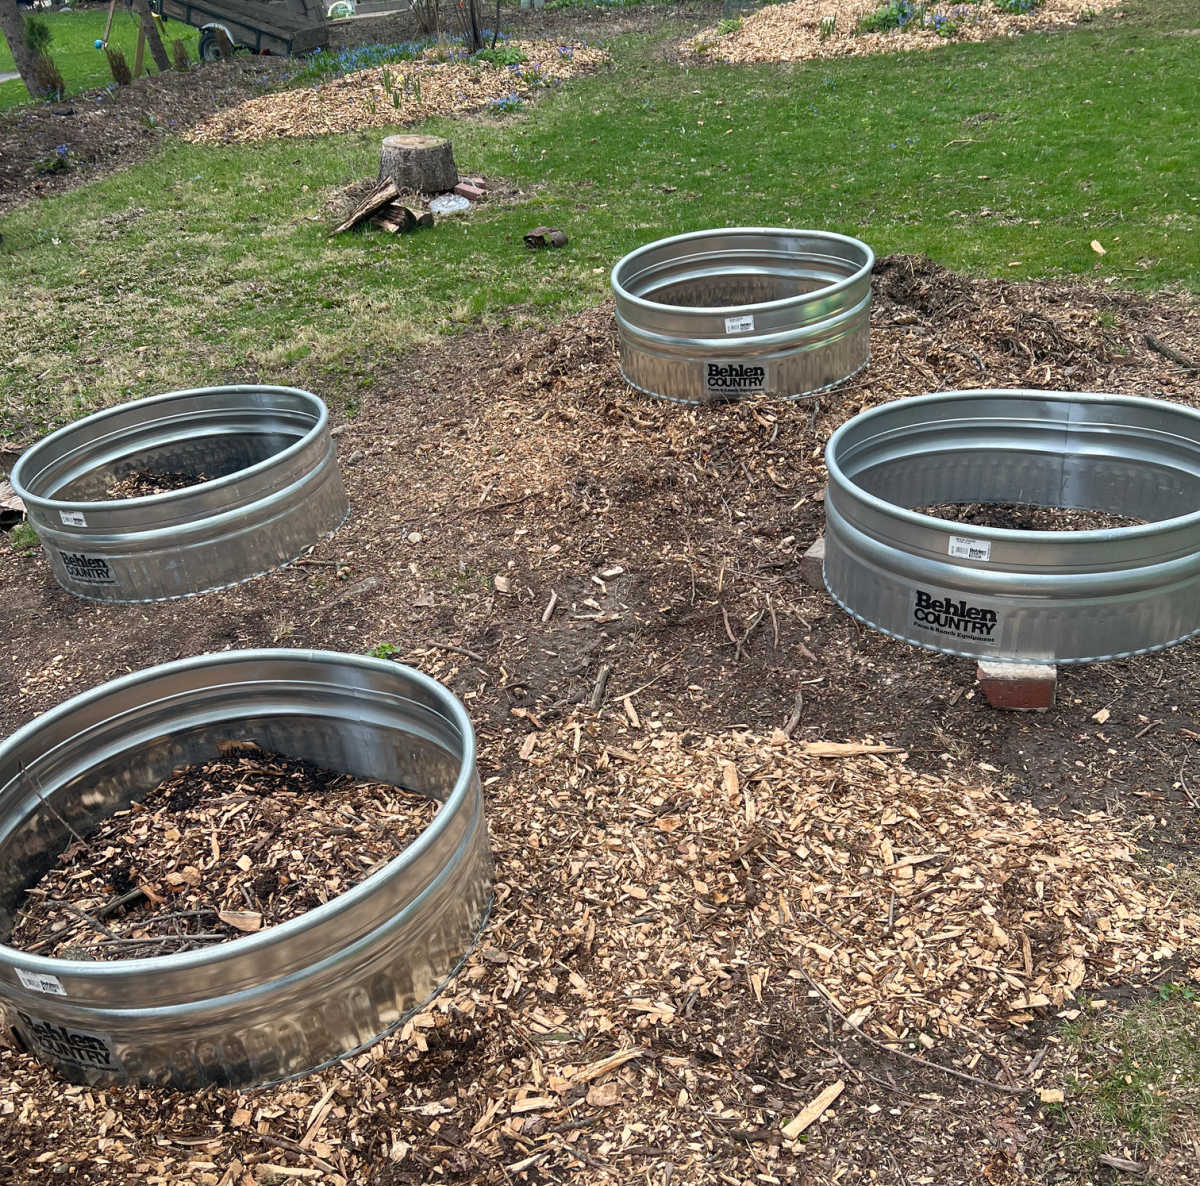 Campfire rings used for my raised garden beds